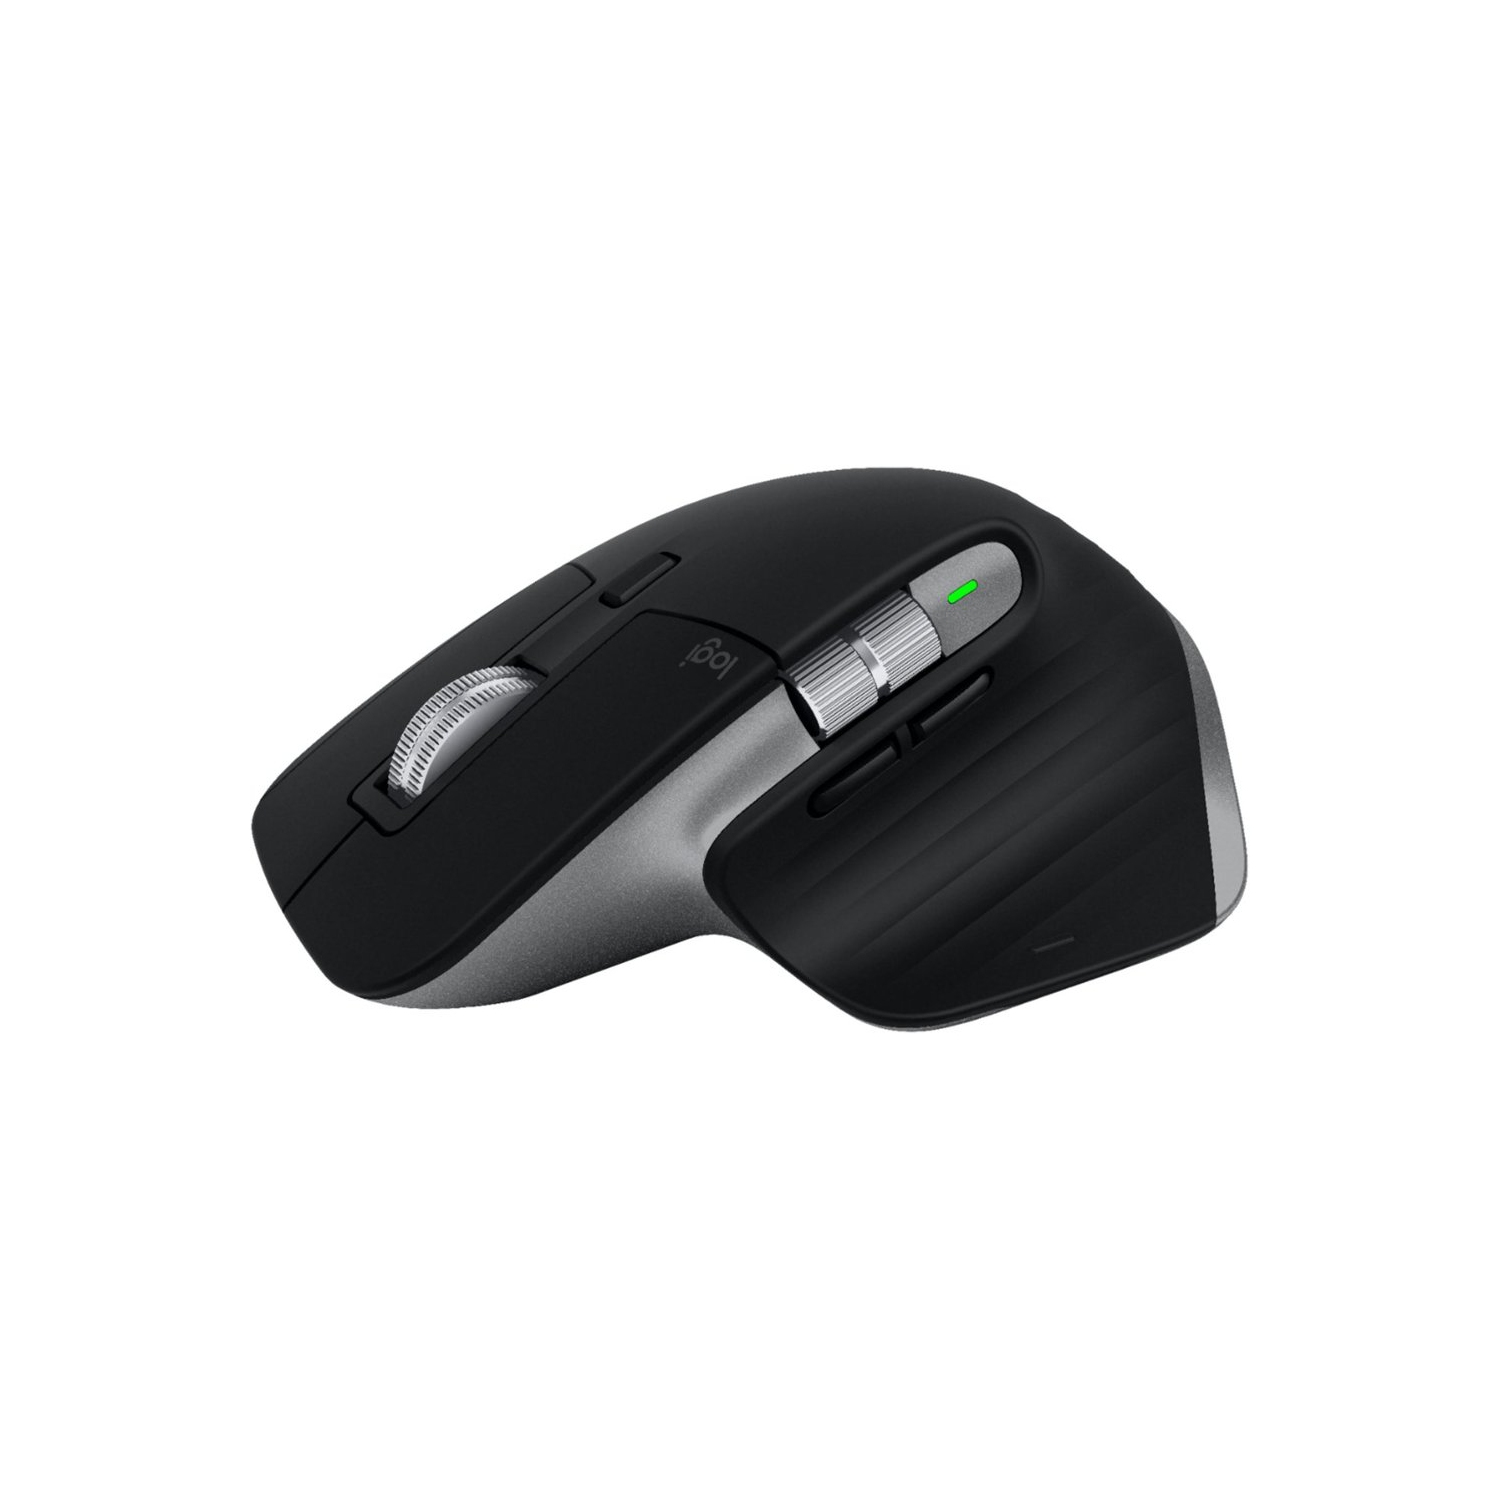 Logitech MX Master 3 Advanced Wireless Laser Mouse for Mac - Space Gray - Open Box